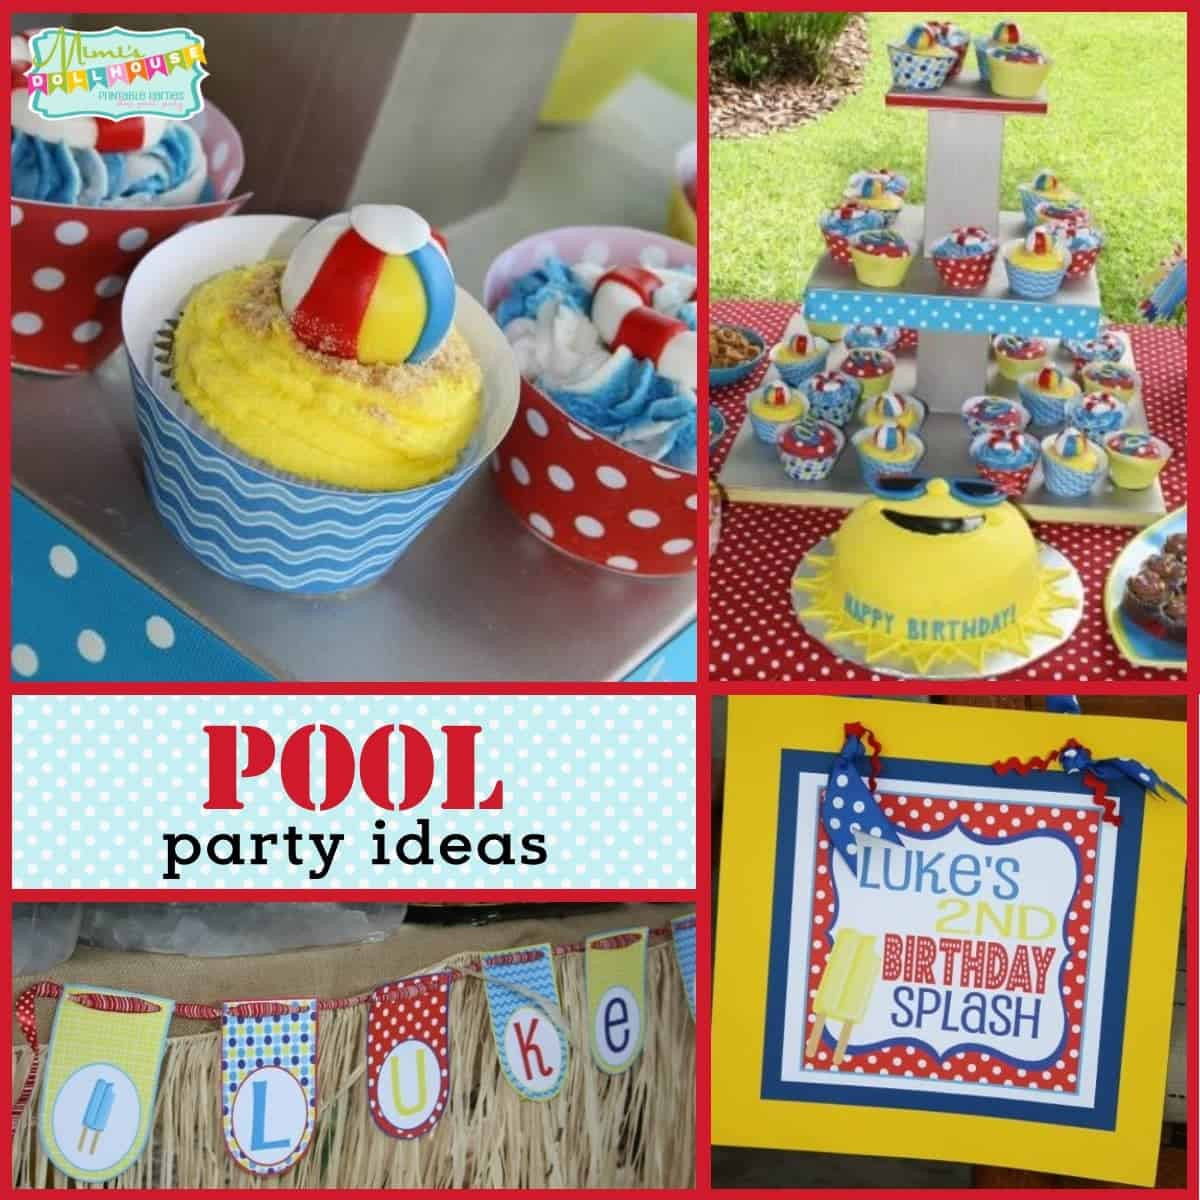 Pool Party Decoration Ideas
 Pool Party Decorations Luke s Pool Party Birthday Party